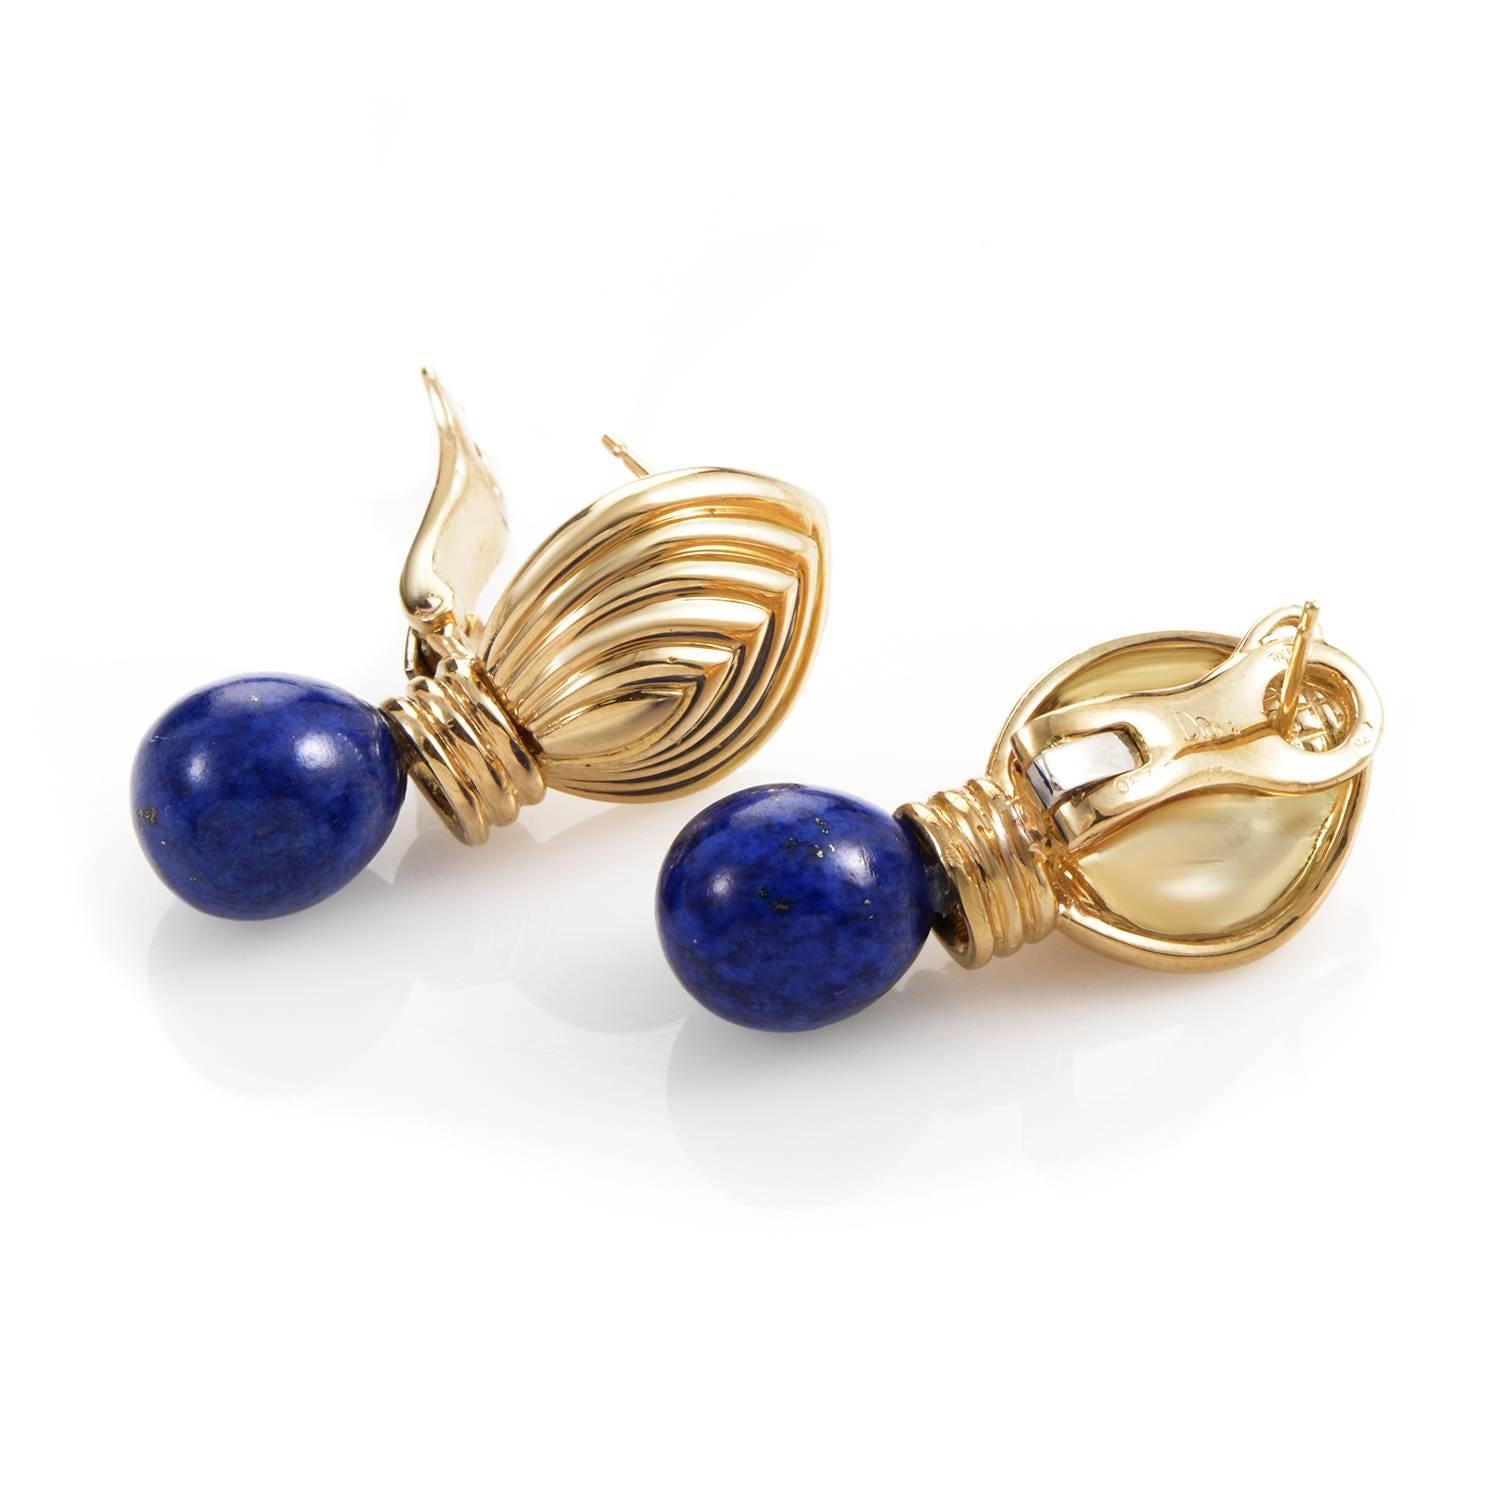 Employing the intrinsic regal beauty of the gorgeous lapis stone and presenting it in a perfectly spherical form, these magnificent earrings from Dior complement stone’s marvelous nuance with the radiance of 18K yellow gold.
Included Items: